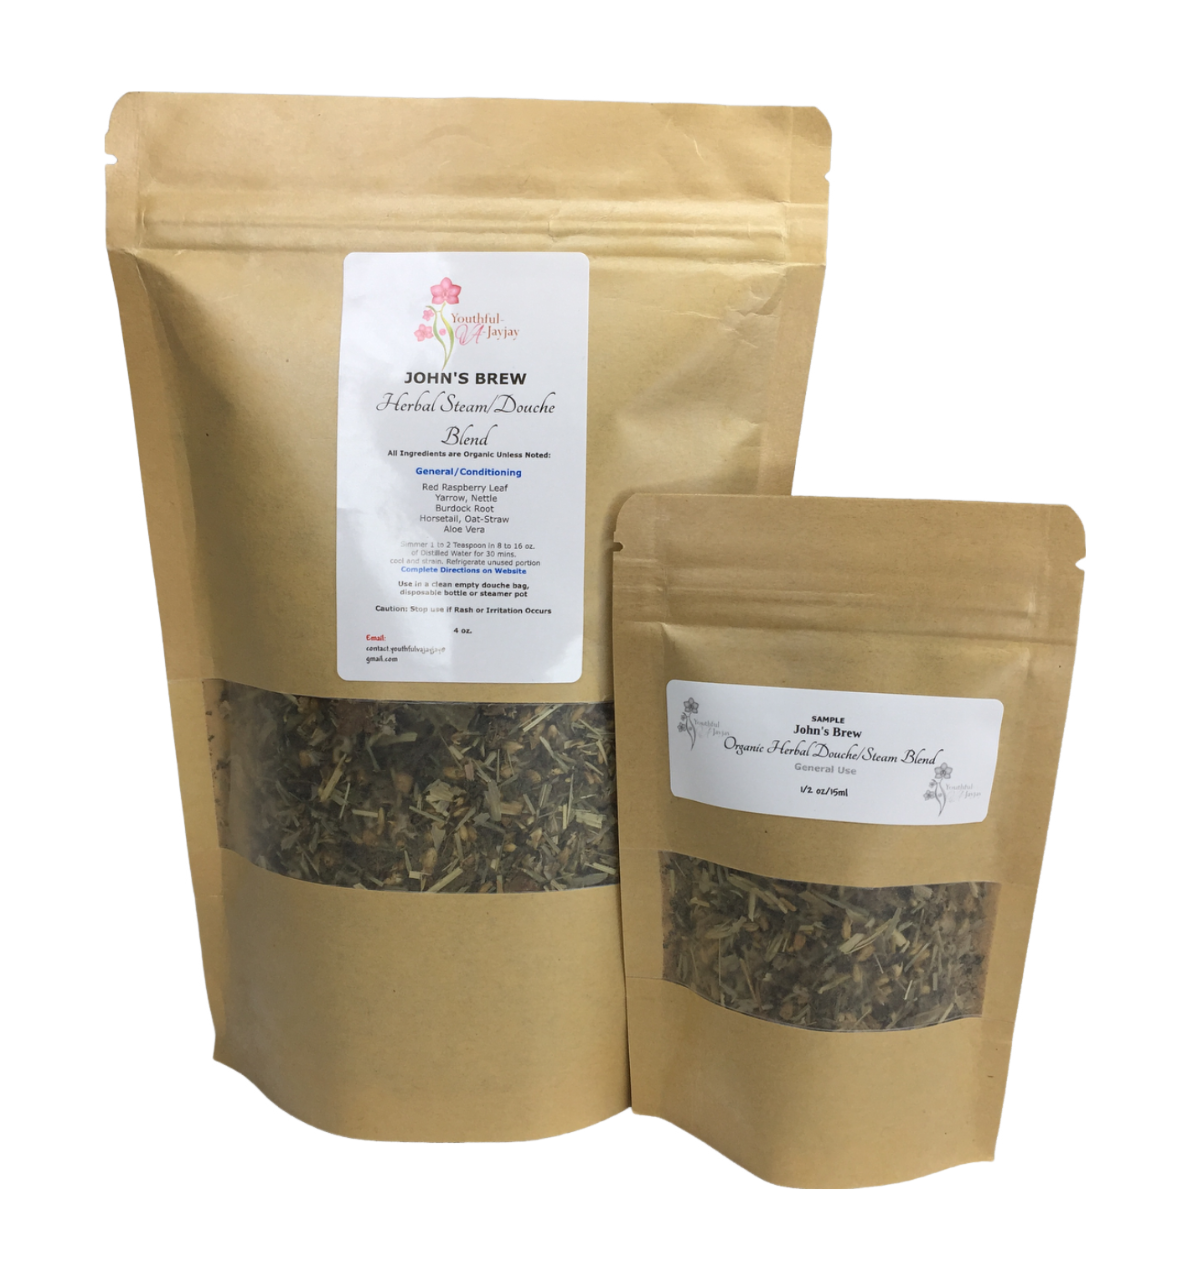 JOHN'S BREW- Organic Herbal Douche/Steam Blend: For Him, Handcrafted Sample Size, G/C 1/2oz.